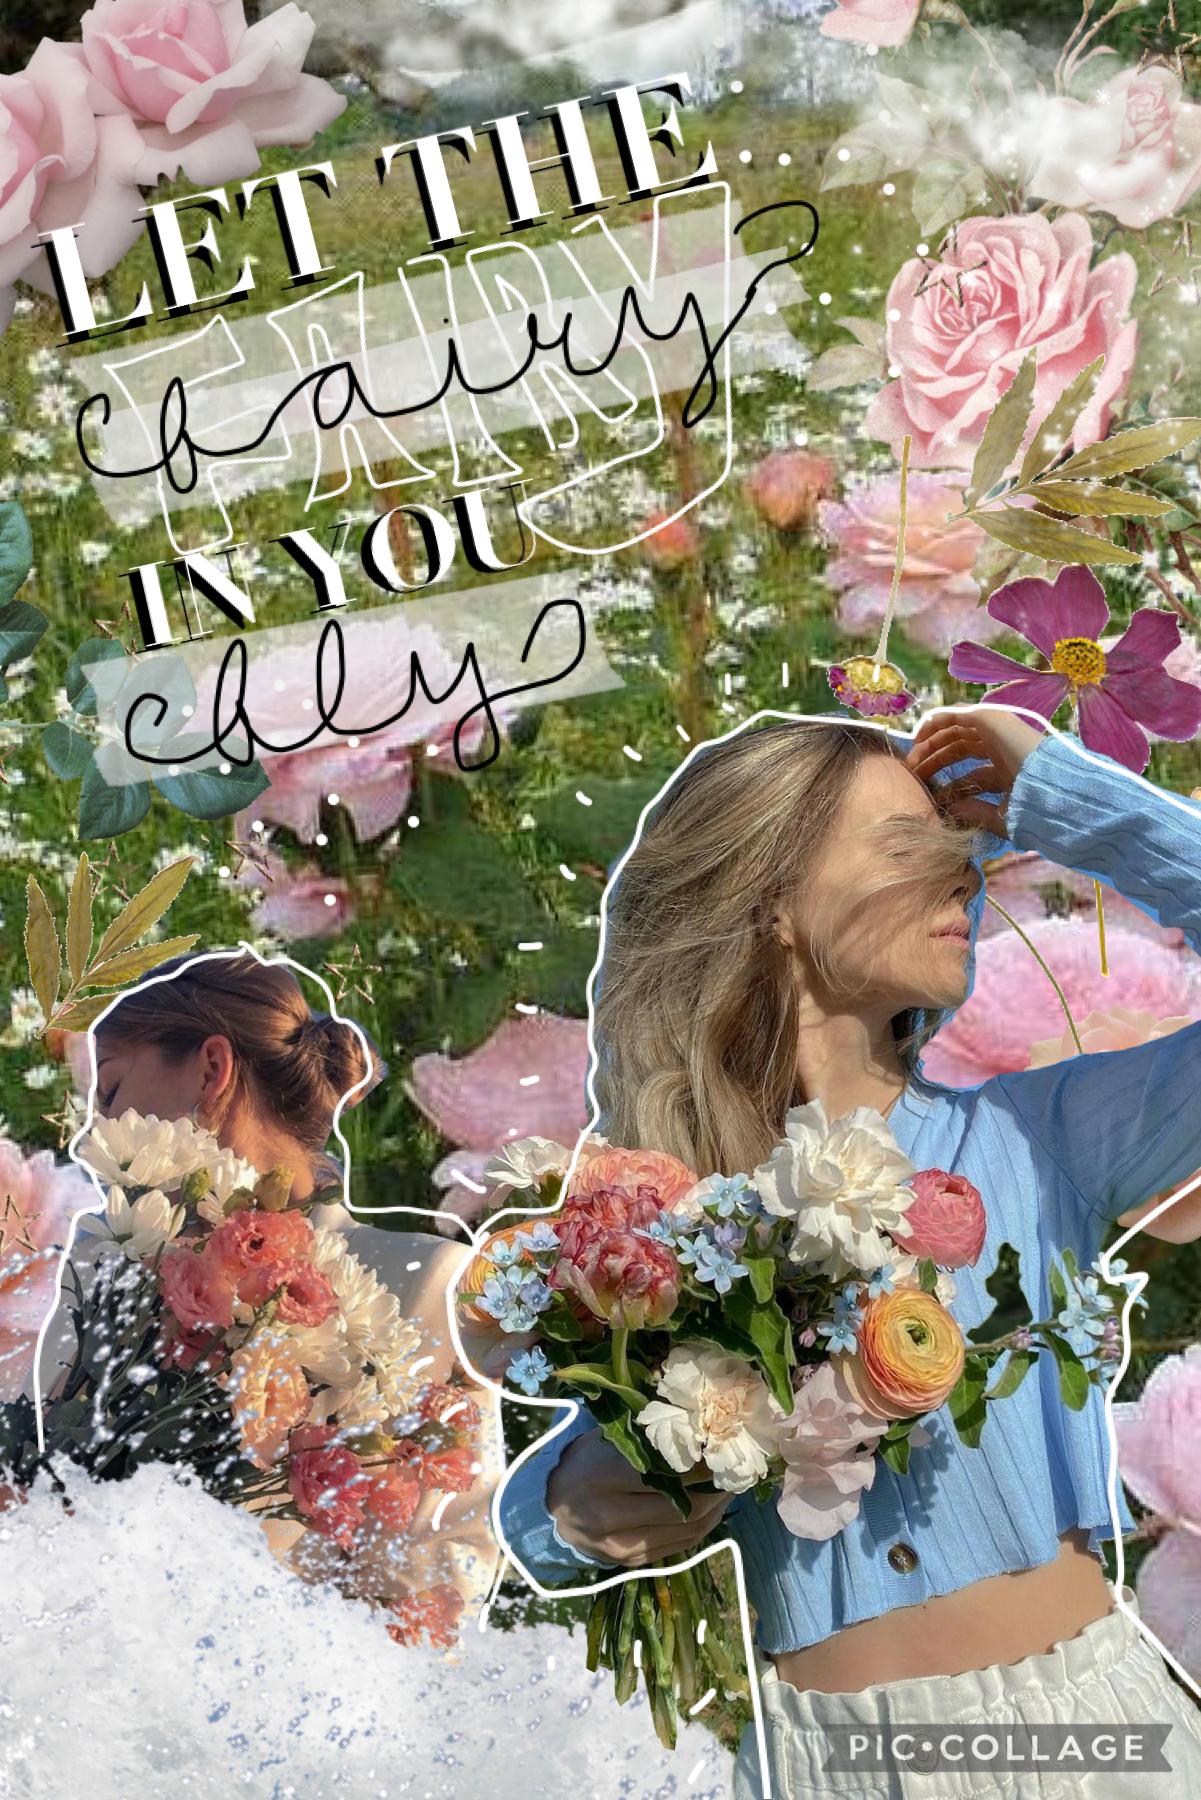 ✨tap✨

heyyy hope y’all had a good 4th of July!! this one’s inspired by @-thebearwiththepetals- because  her acc is literal perfection 👏 anyway if anyone wants to chat in the comments lmk hope y’all have a great day! :)